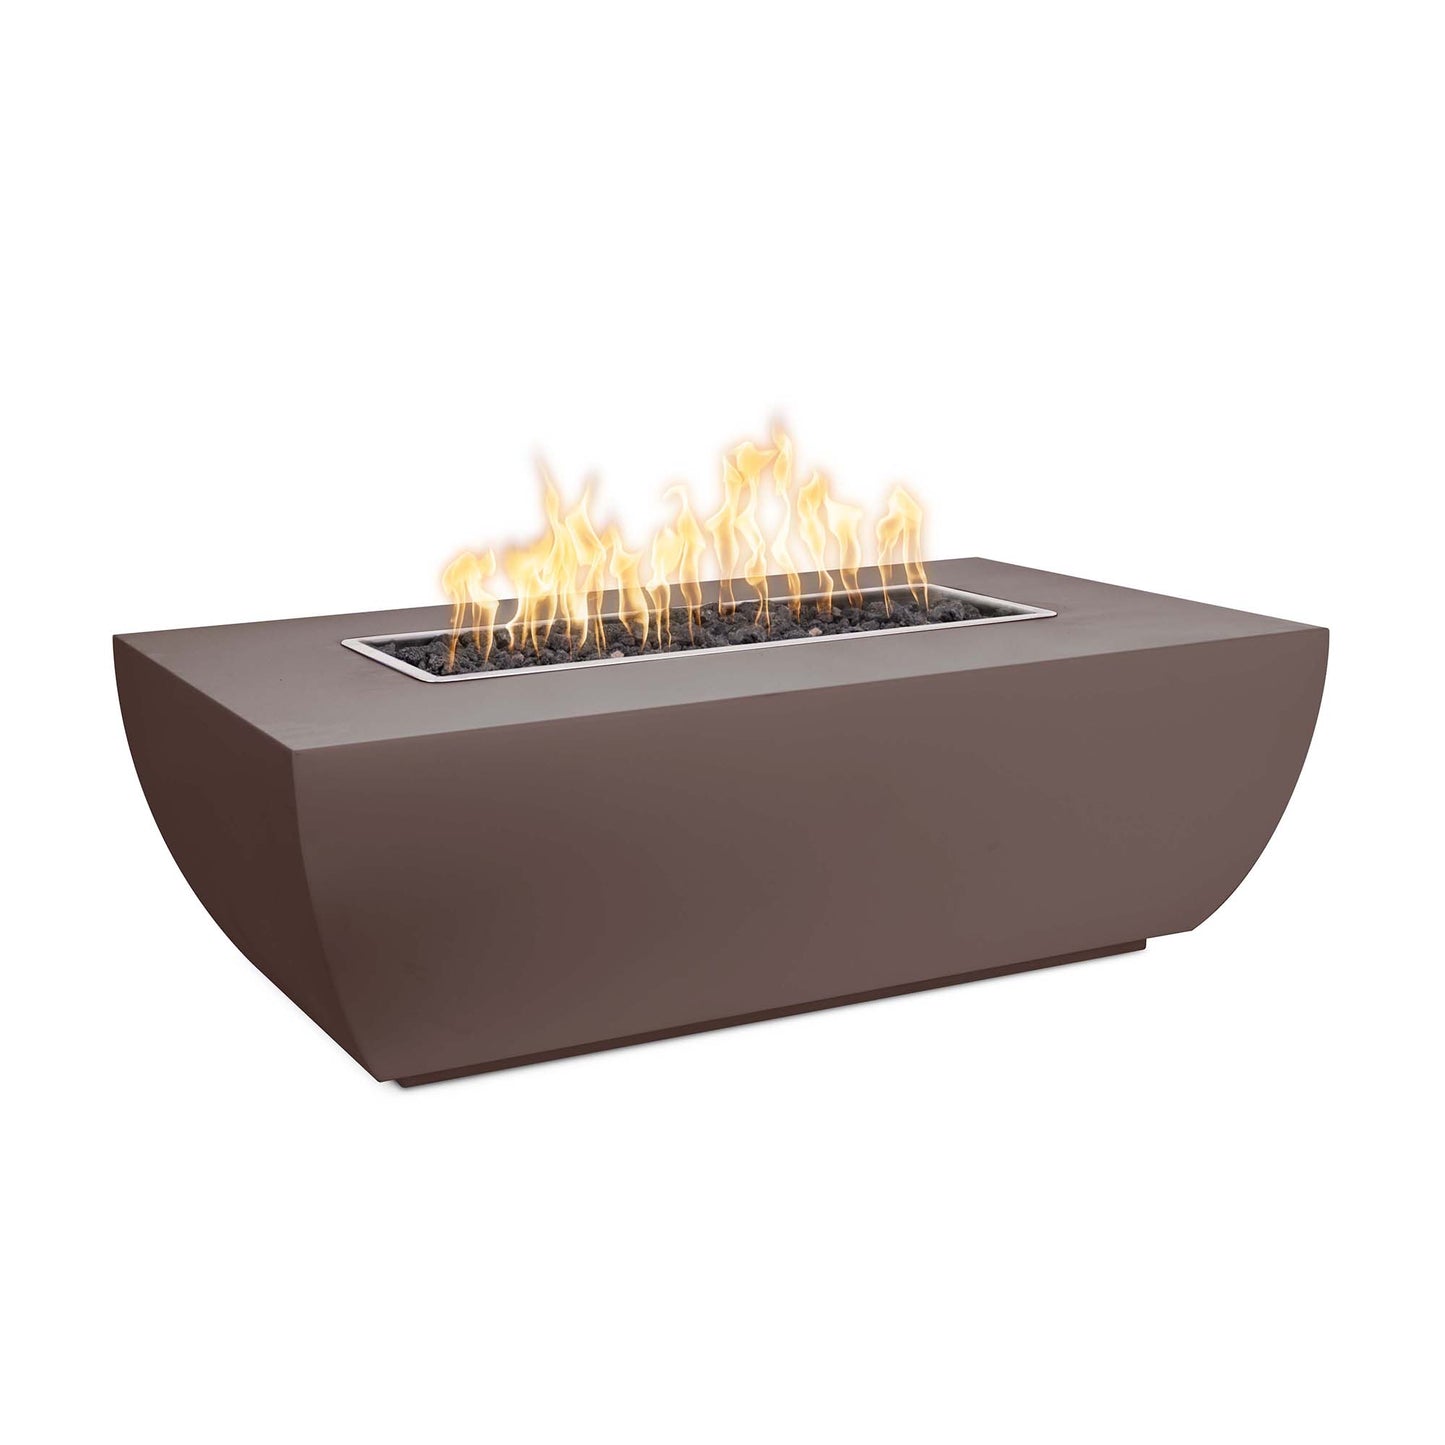 Avalon Metal Fire Pits 72" - 15" Tall - Electronic Ignition